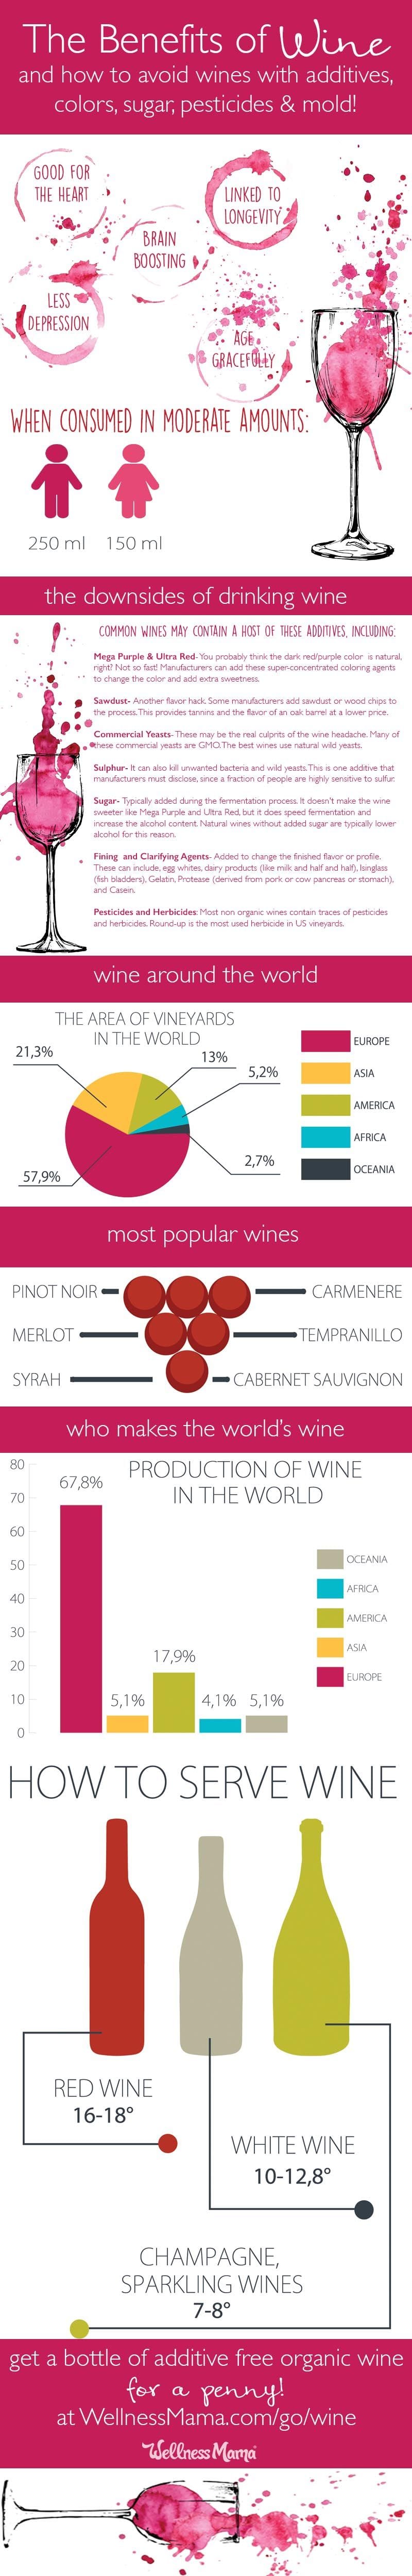 all-about-wine-infographic